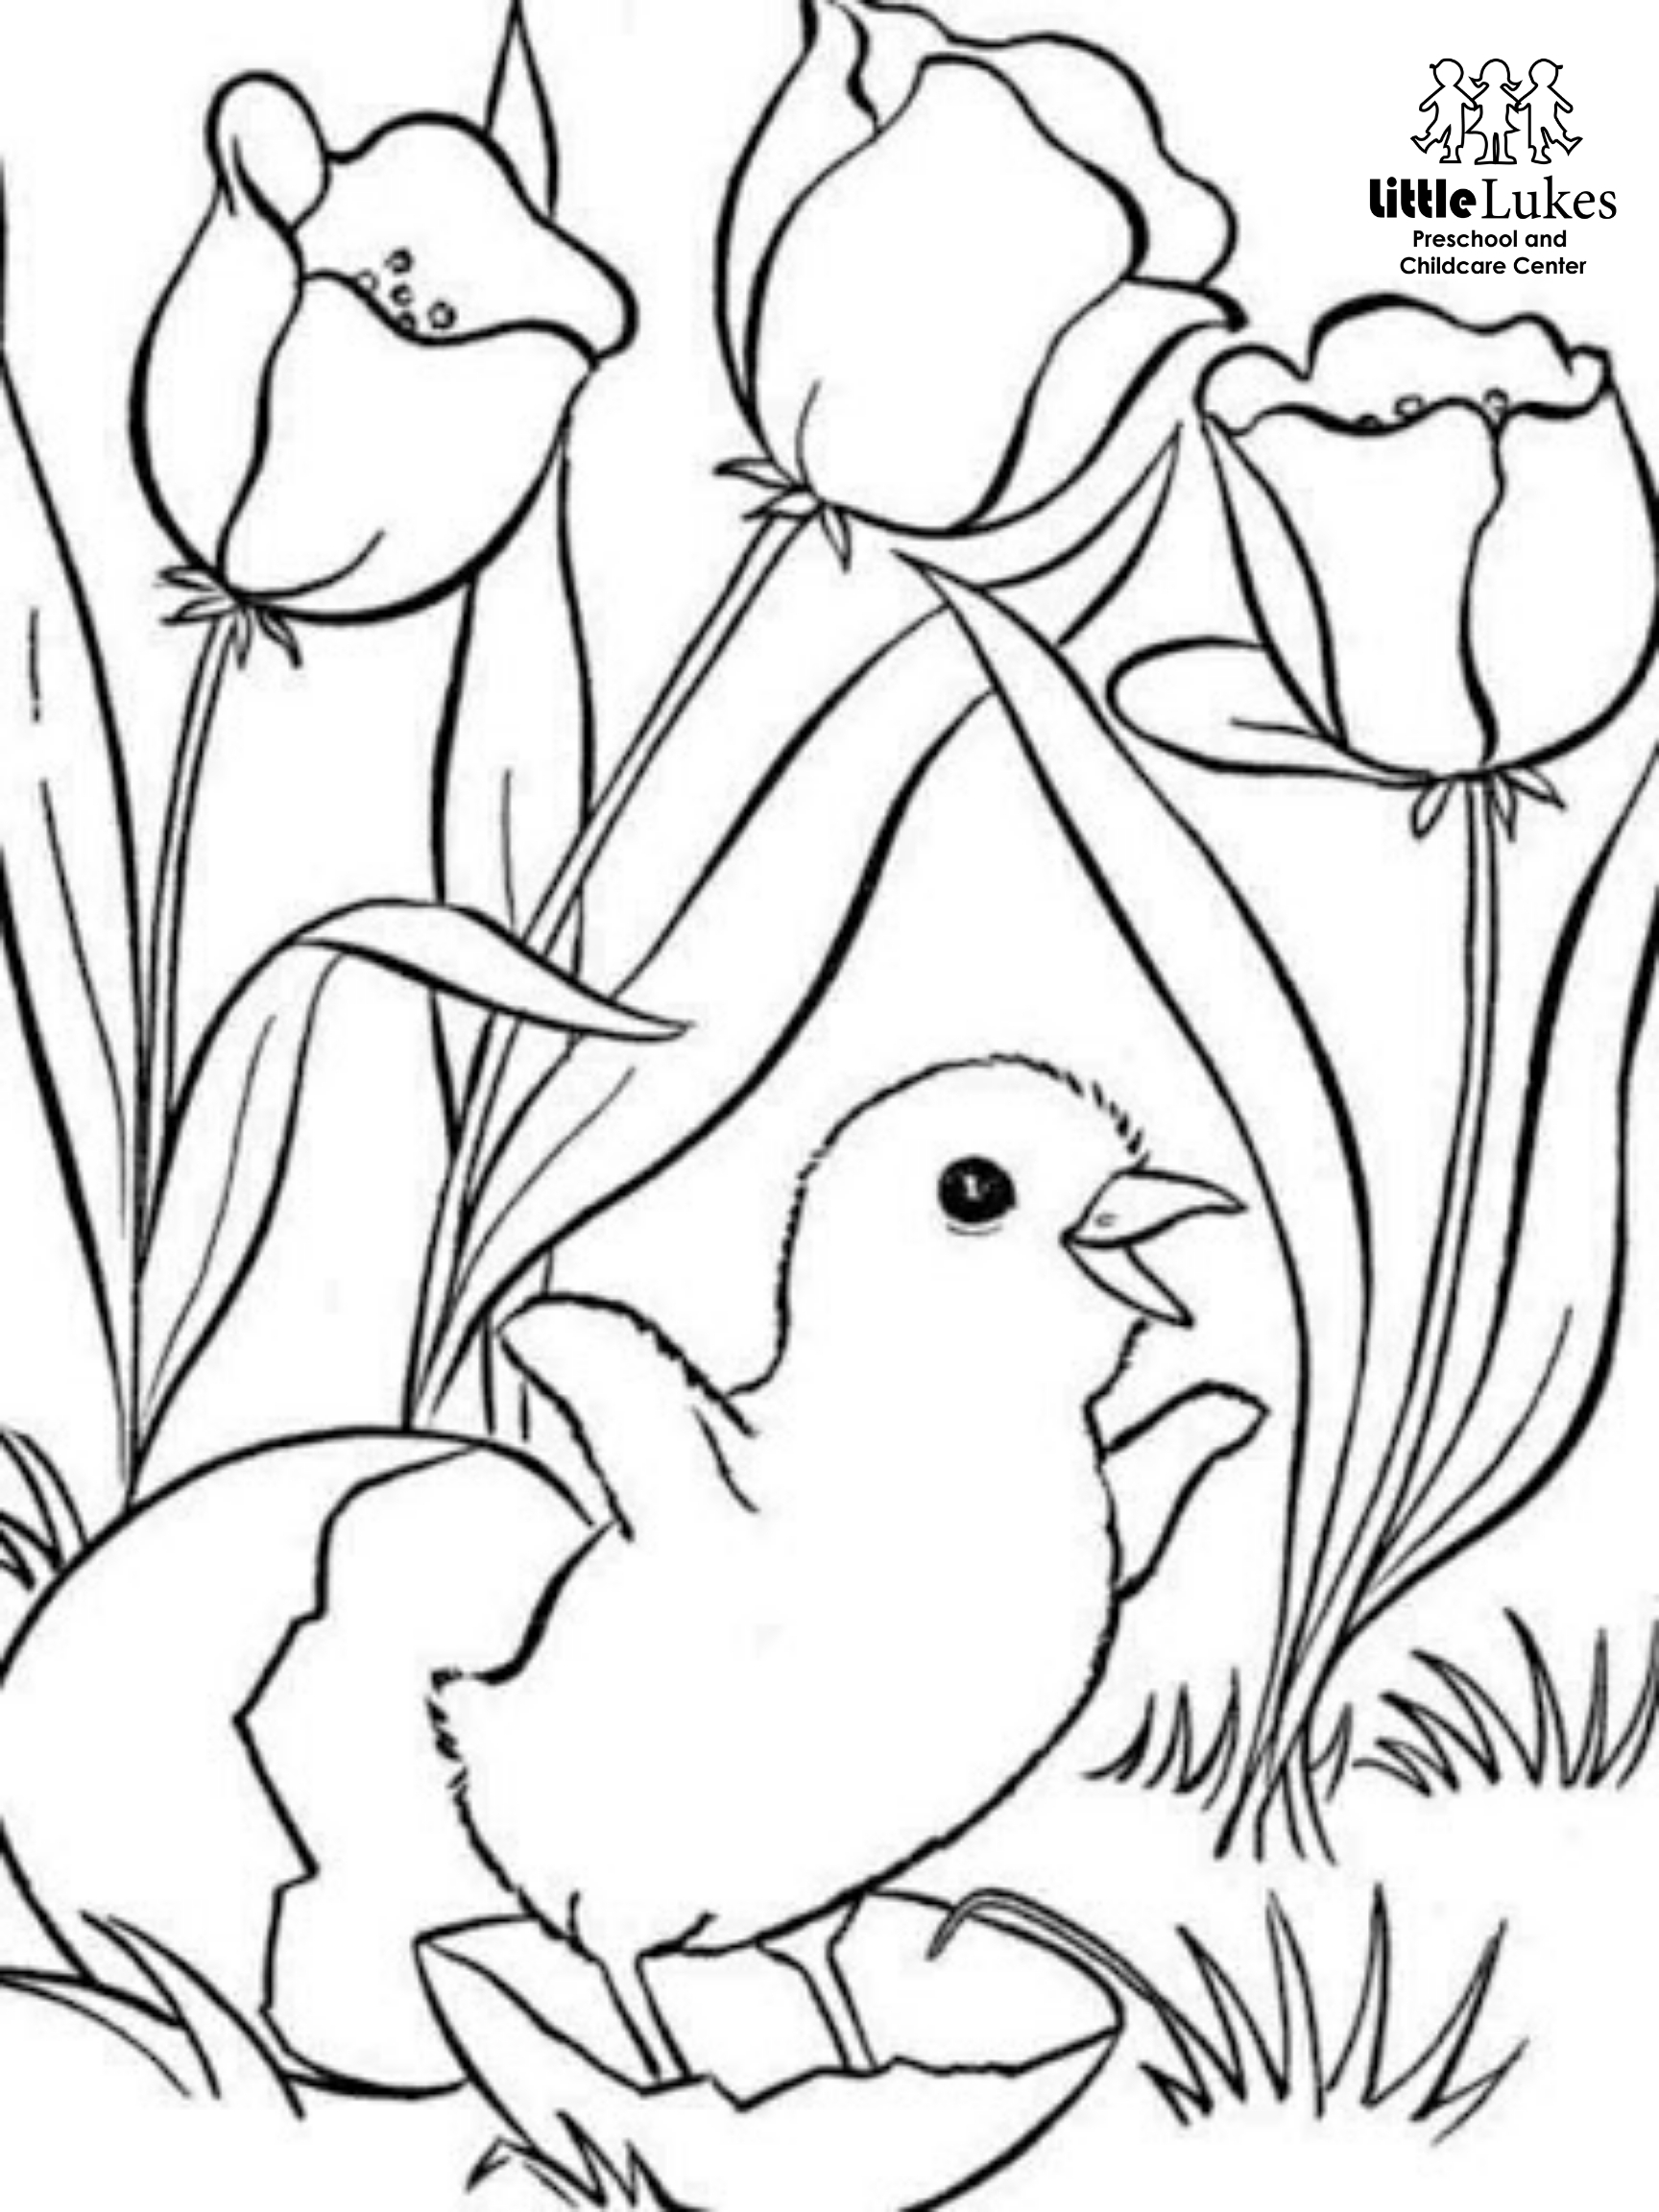 Free Spring Coloring Pages! | Little Lukes Preschool And Childcare Center